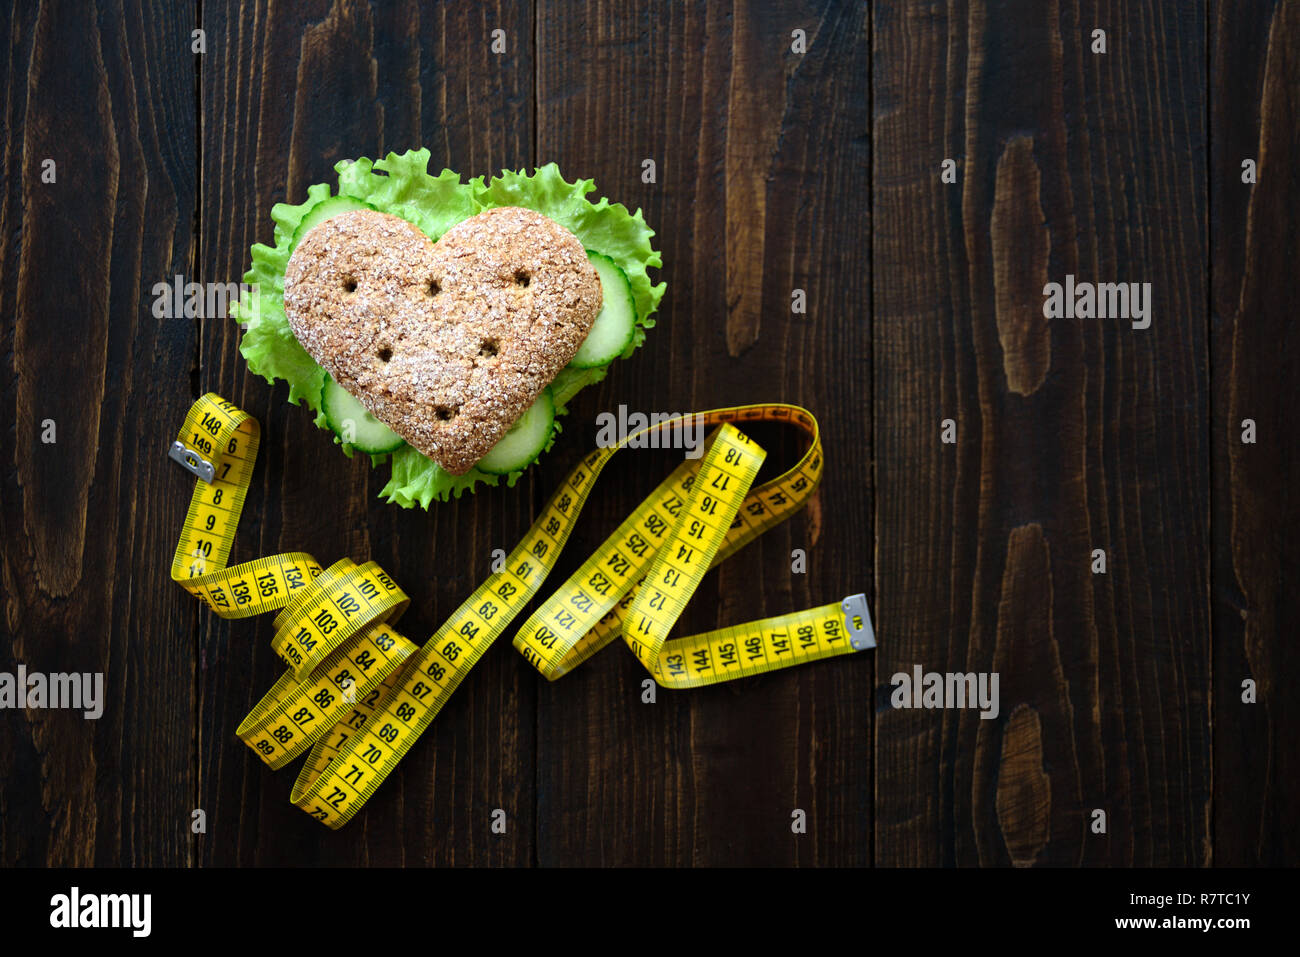 Healthy heart shape sandwich with salad and cucumbers. Dieting concept. Wooden background. Measuring tape Stock Photo